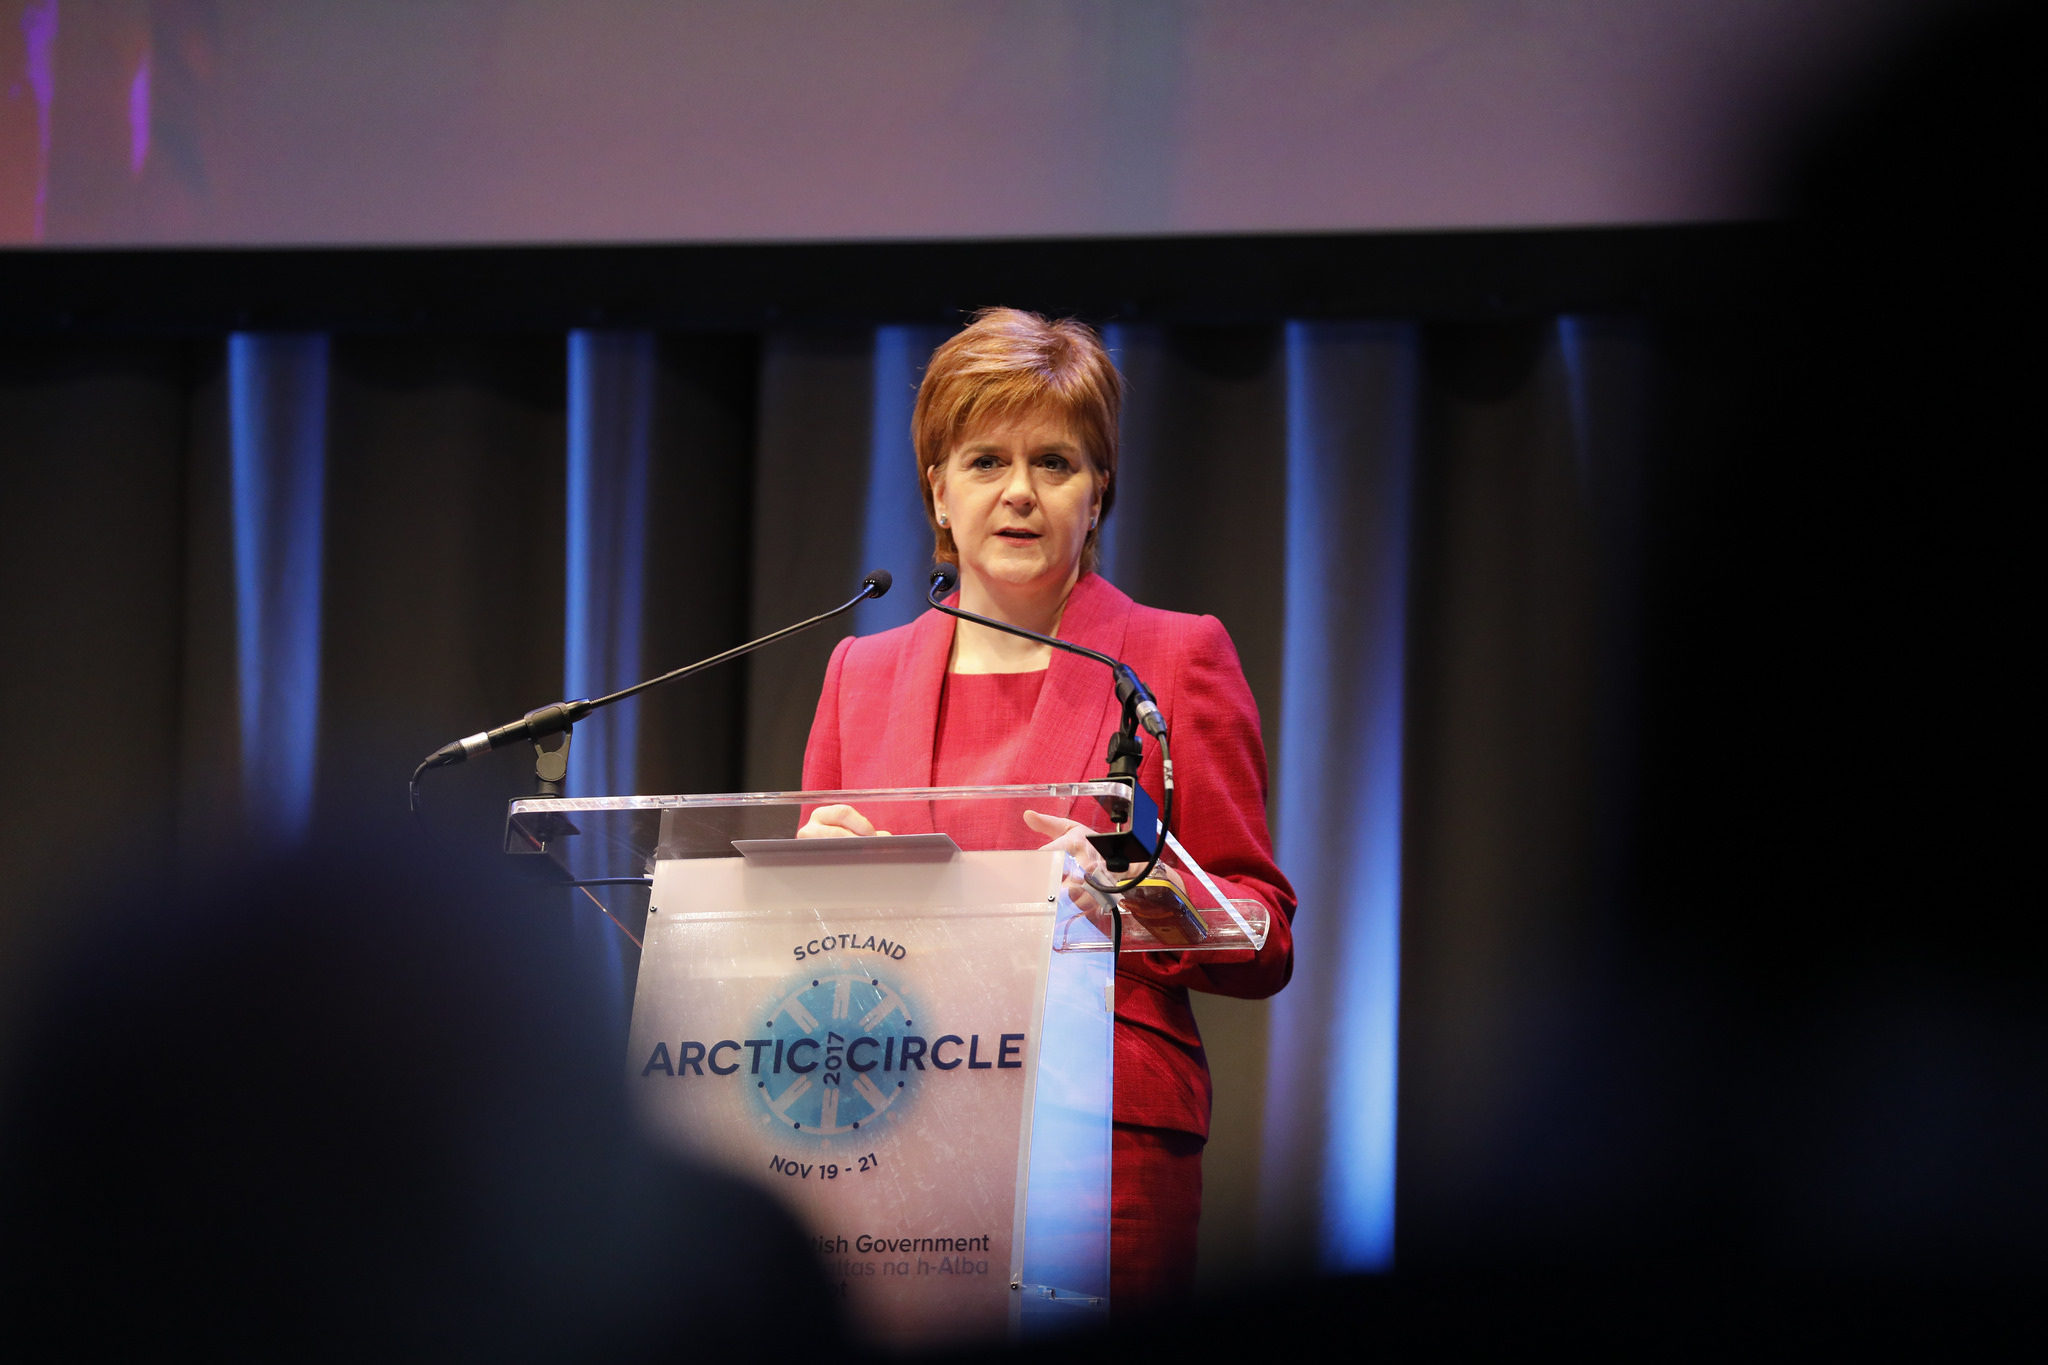 Its geographic position made it natural for Scotland to look both north and south as it sought solutions to social and economic problems, First Minister Nicola Sturgeon said Monday at an Arctic conference in Edinburgh. (First Minister of Scotland)